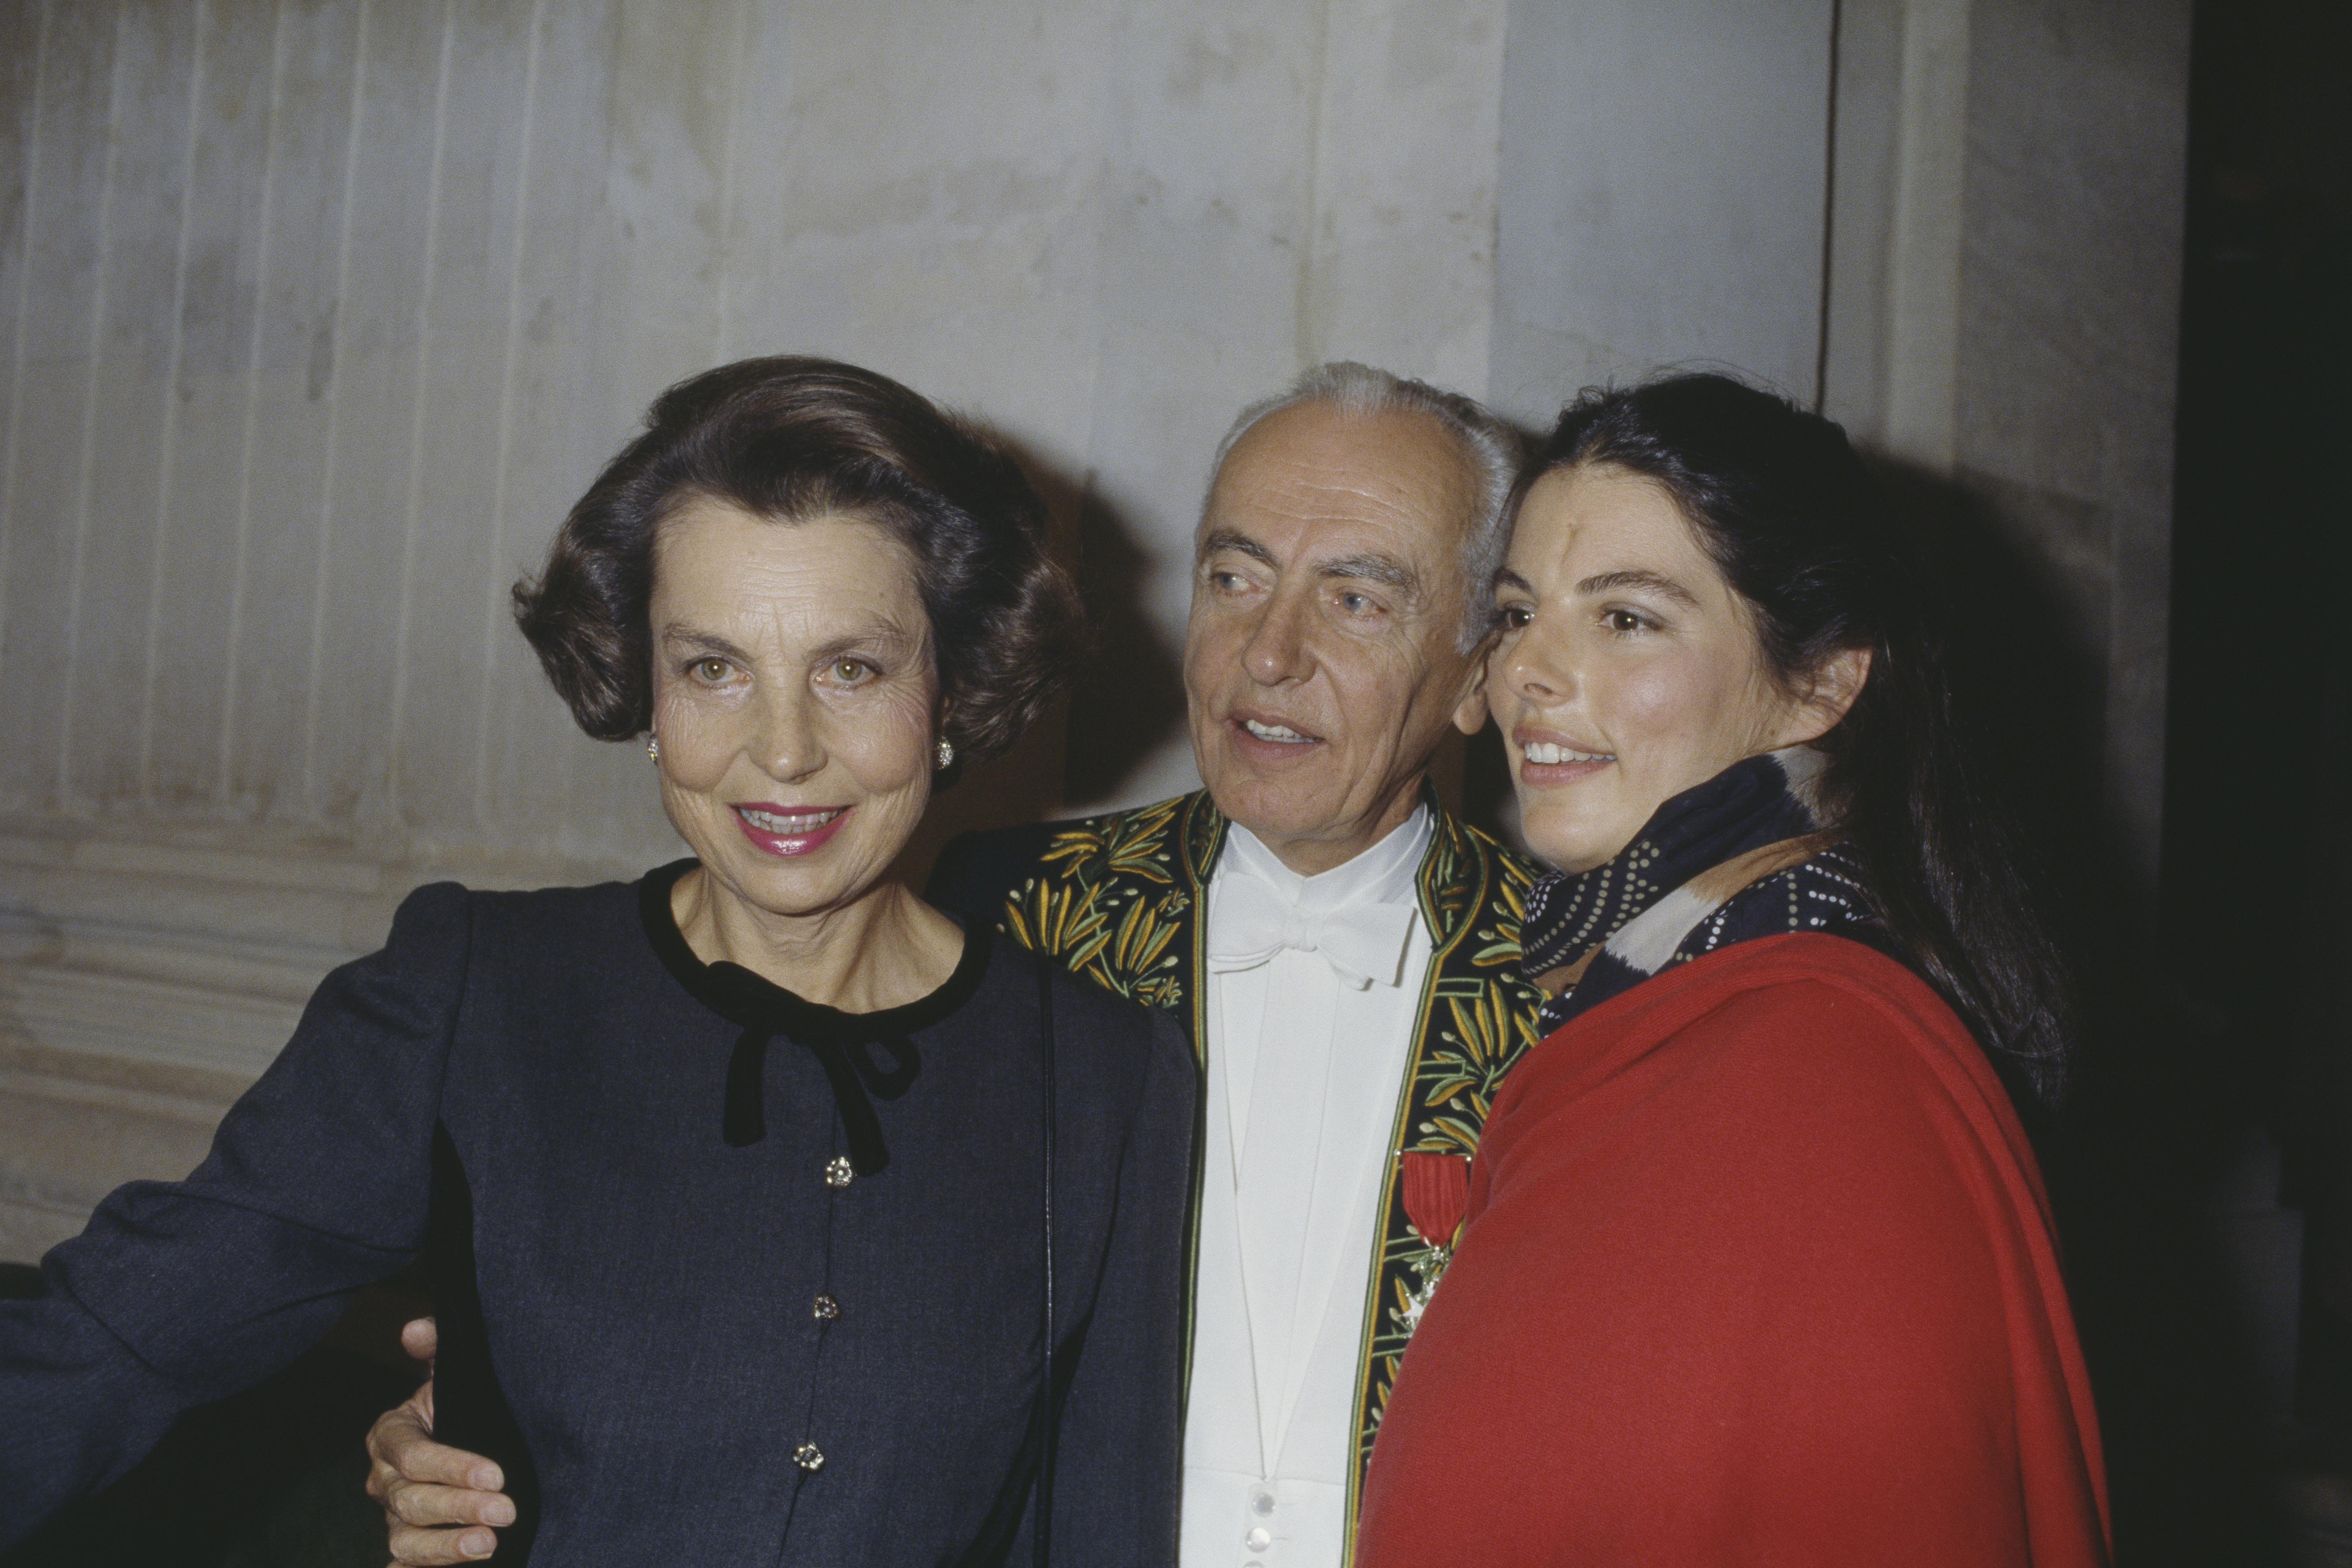 Lilian and André Bettencourt with Françoise Bettencourt Meyers at a welcome ceremony on March 23, 1988 | Source: Getty Images